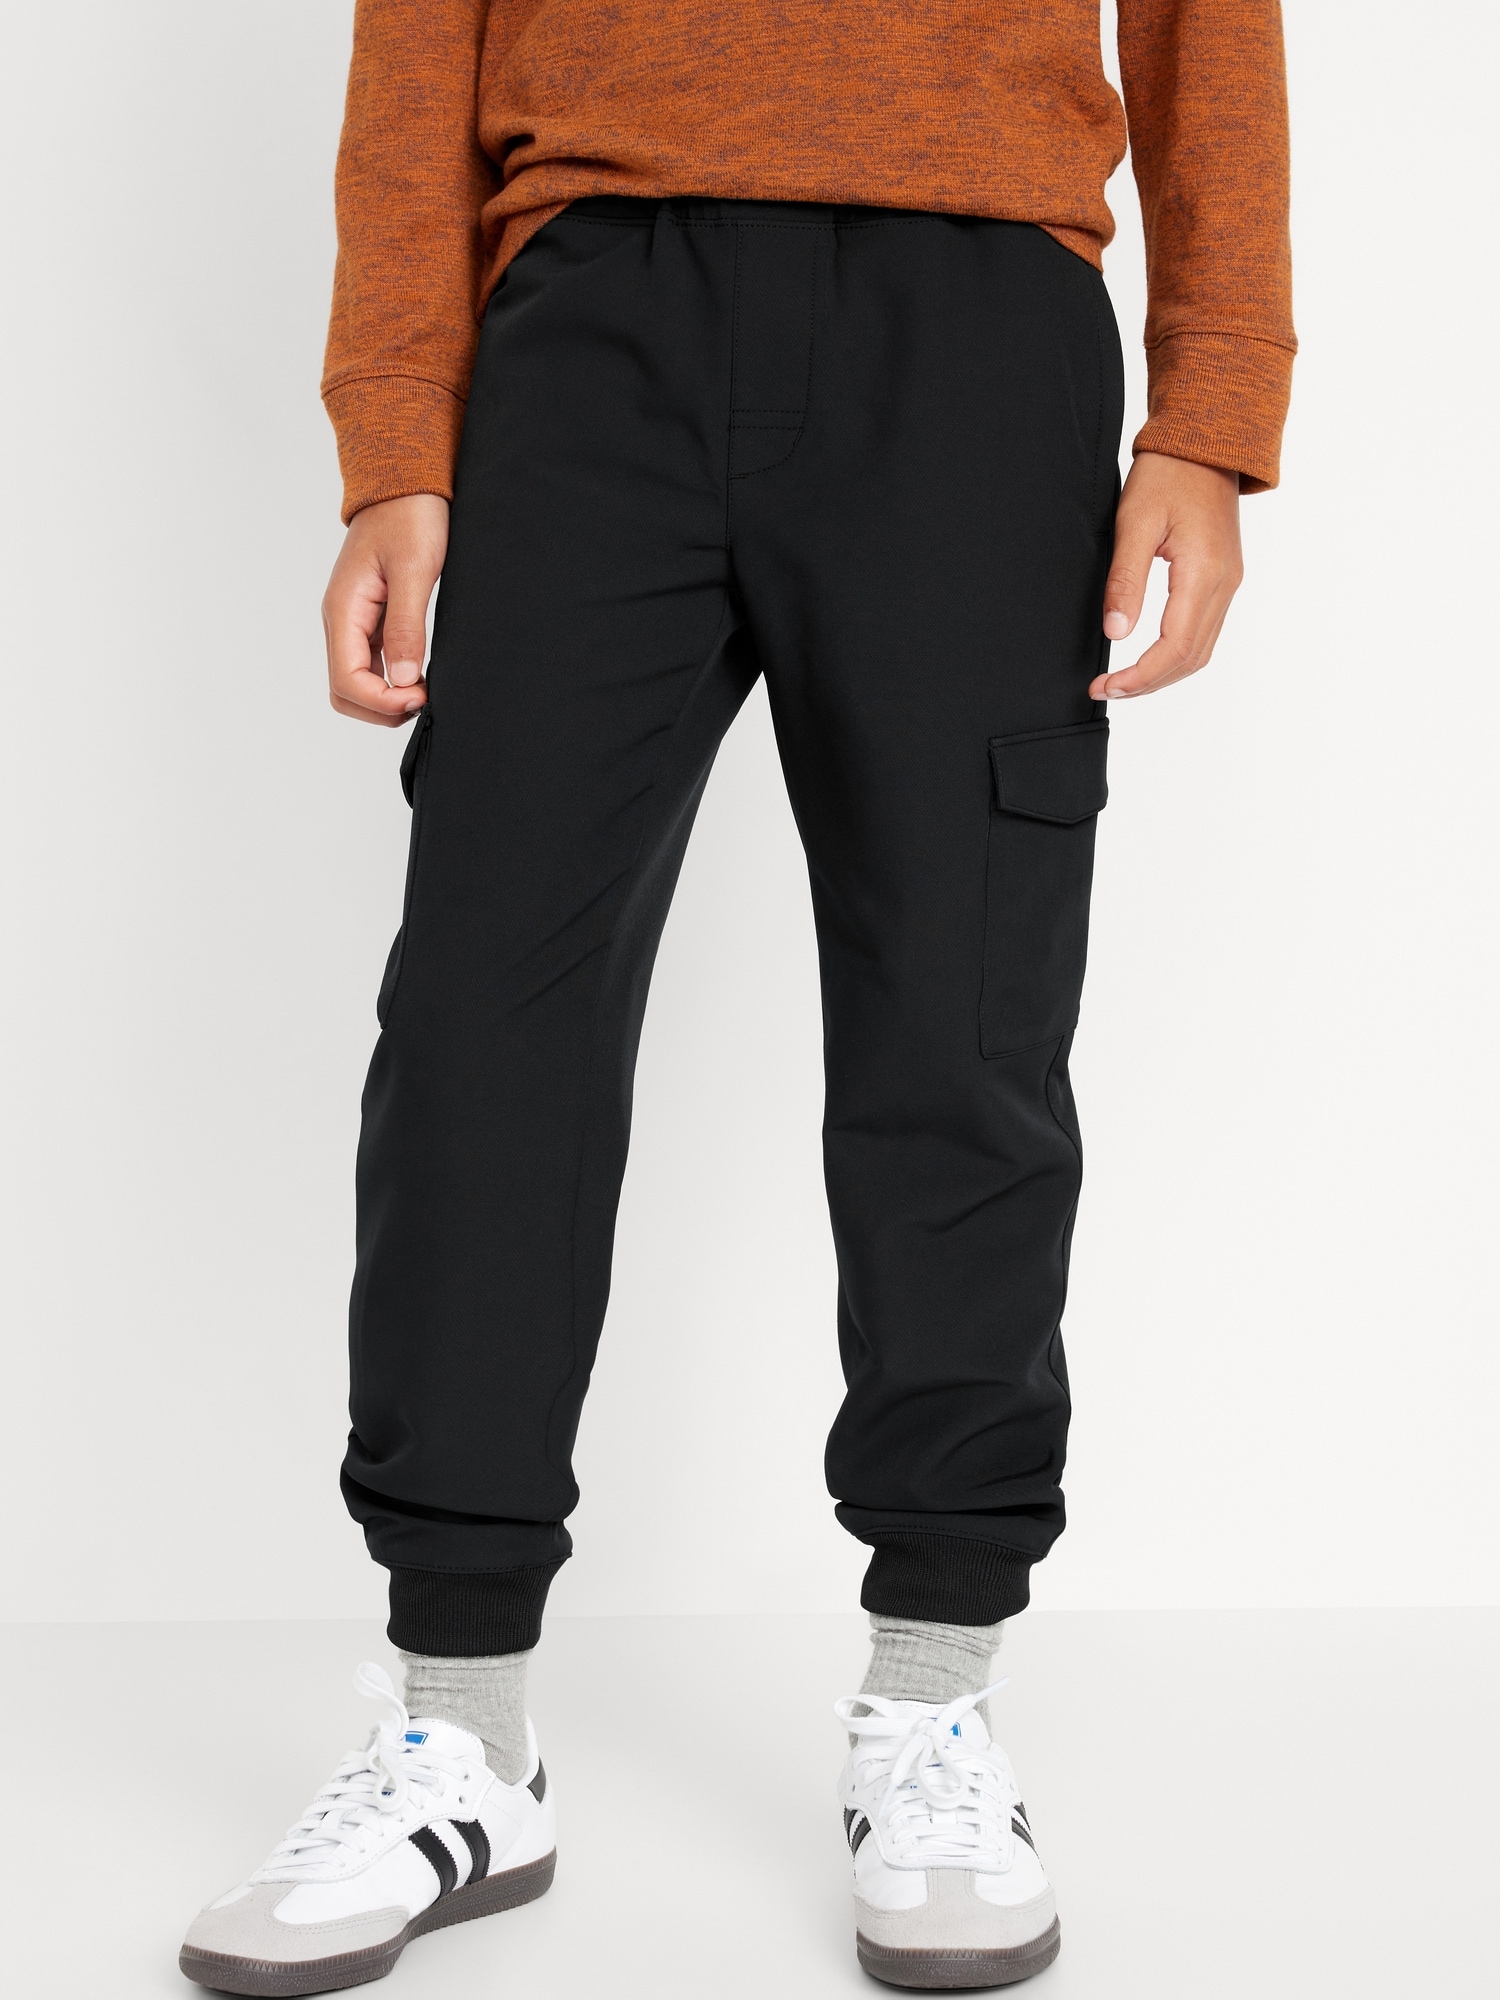 StretchTech Cargo Jogger Performance Pants for Boys